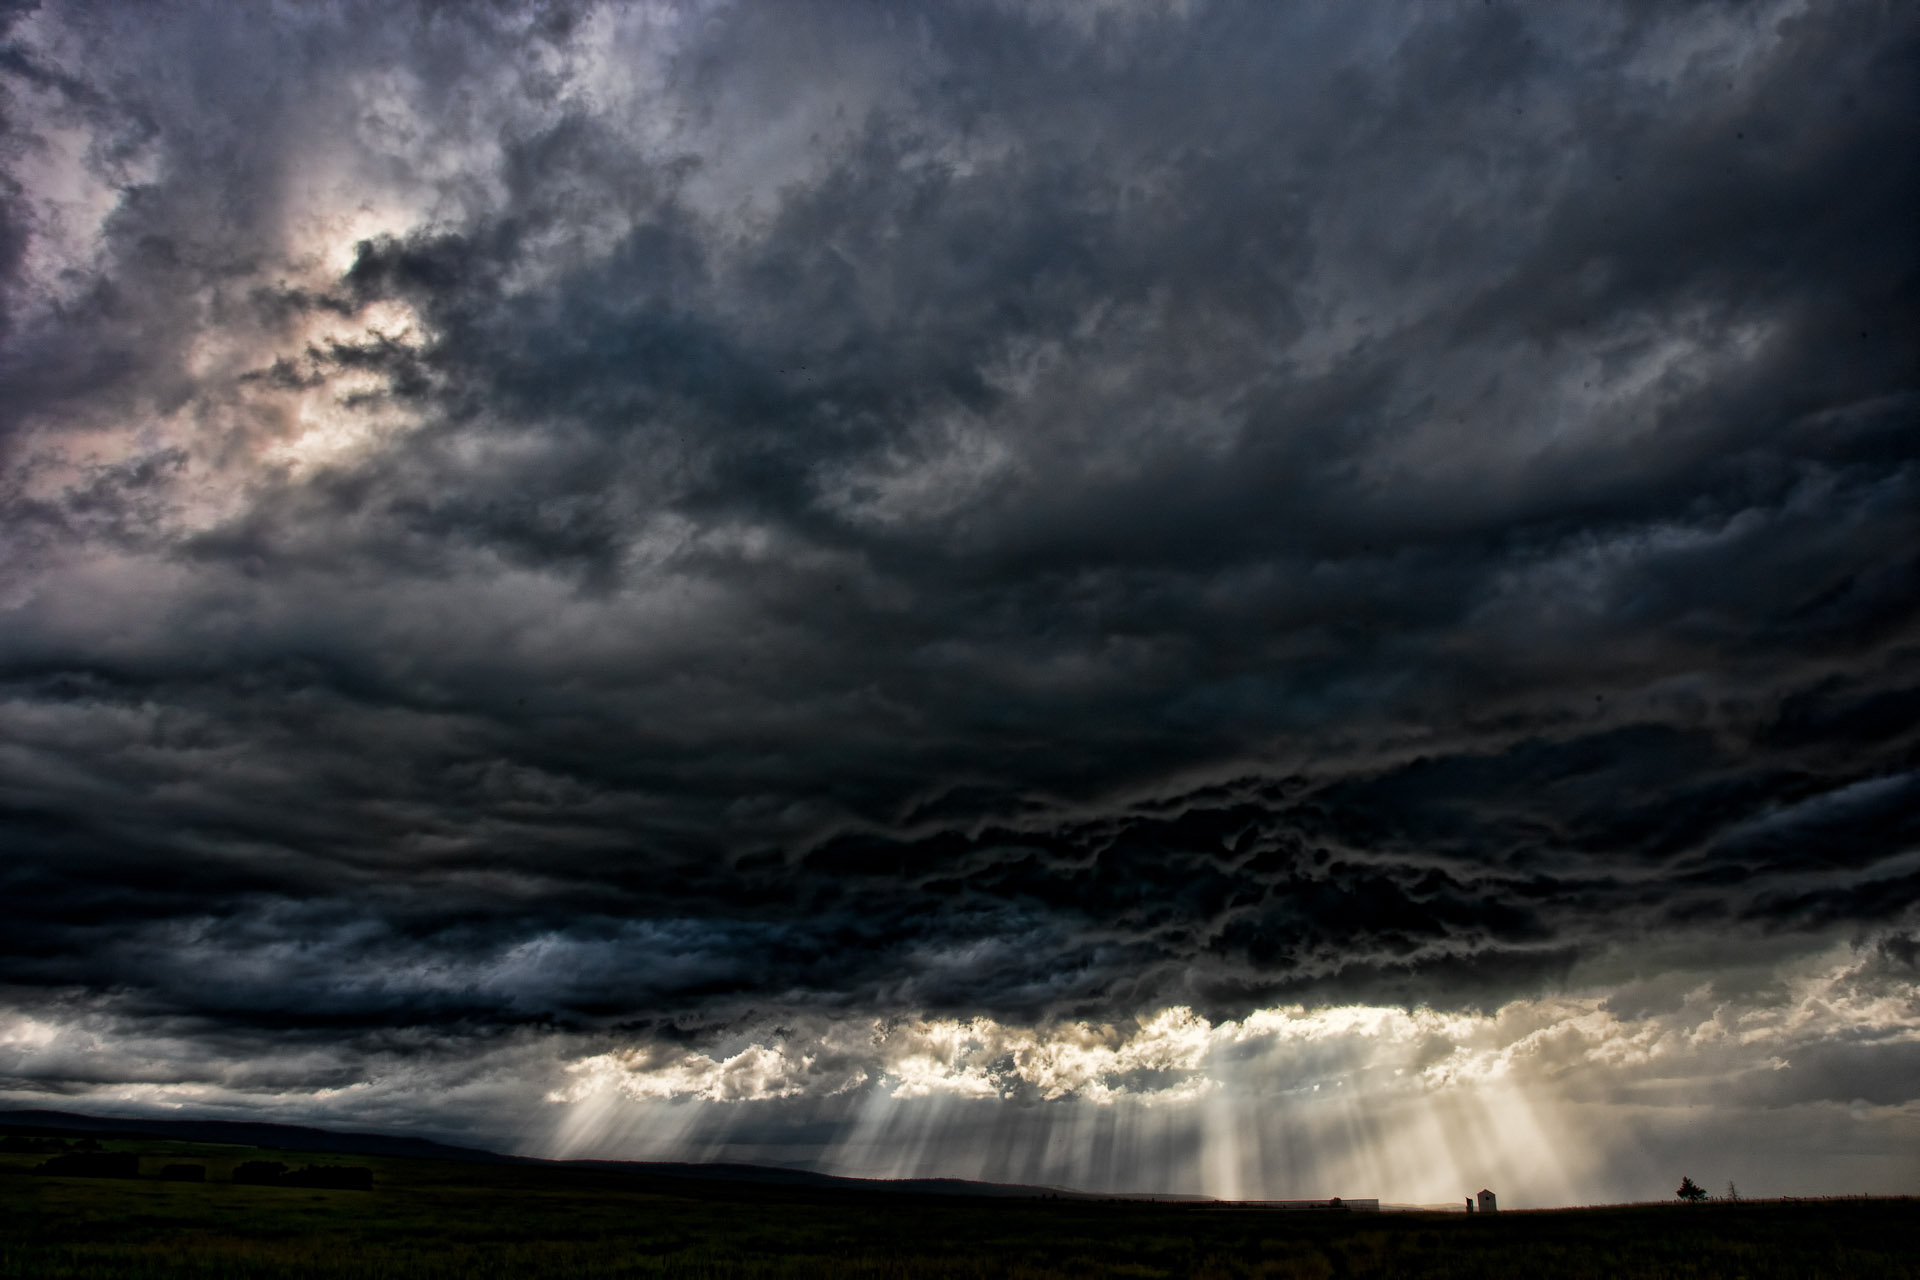 Free Download Prairie Storm Dark Clouds Heavy Rain And A Lightning Strike 19x1280 For Your Desktop Mobile Tablet Explore 50 Pictures Of Rain Storms Wallpaper Pictures Of Rain Storms